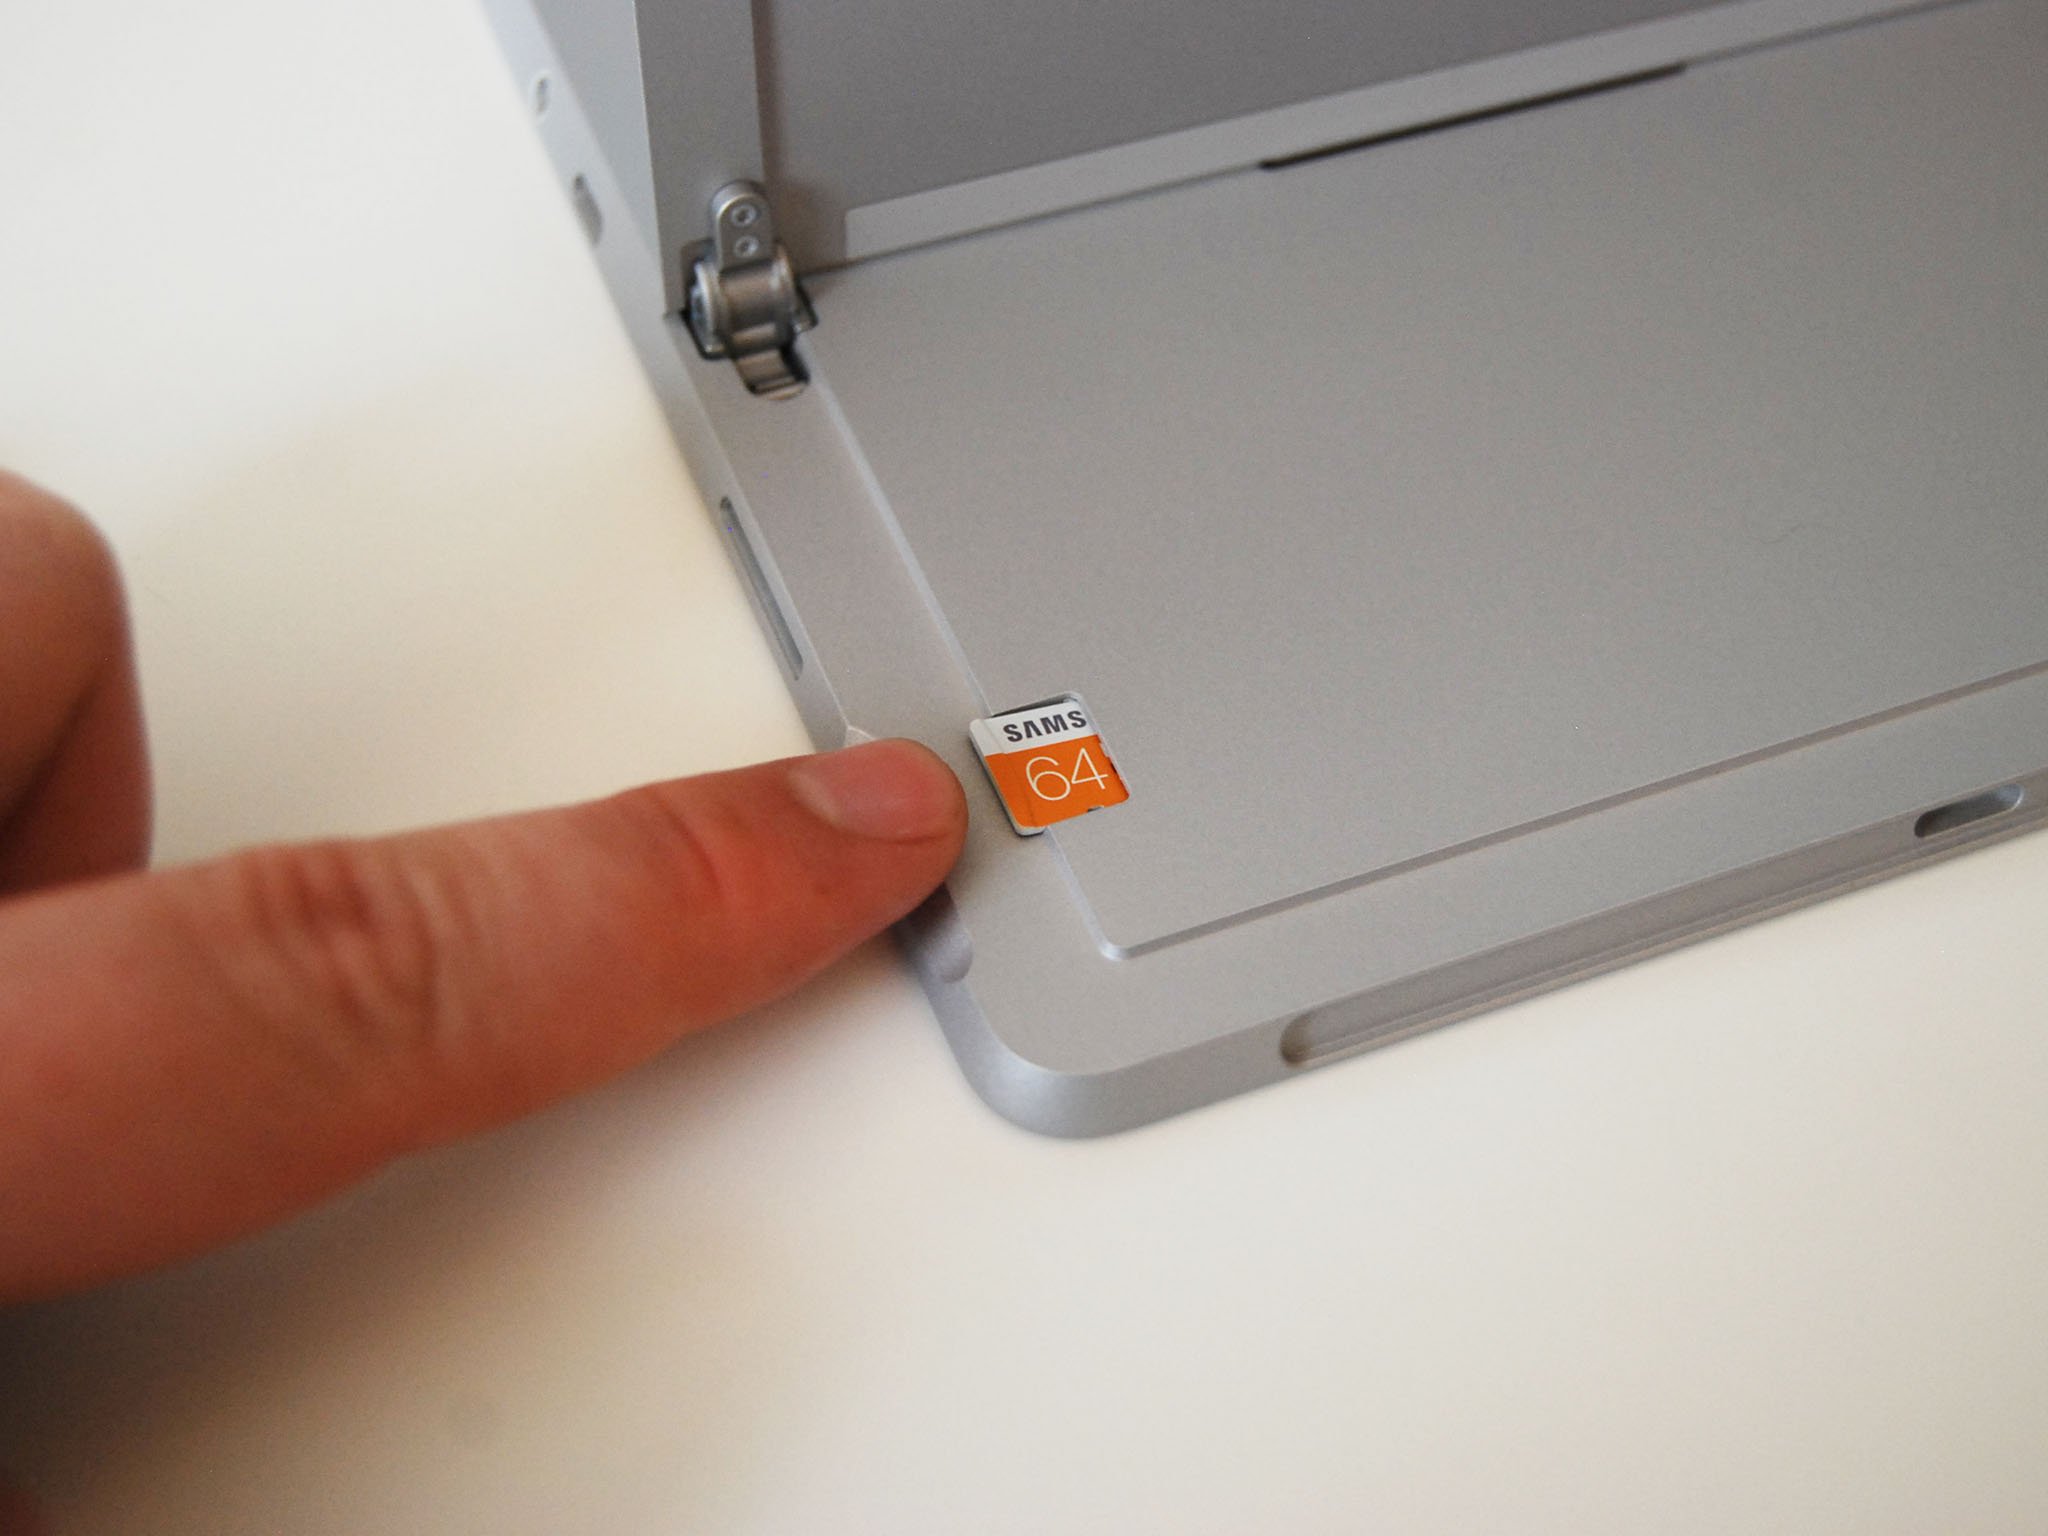 Slide the microSD card into the slot.